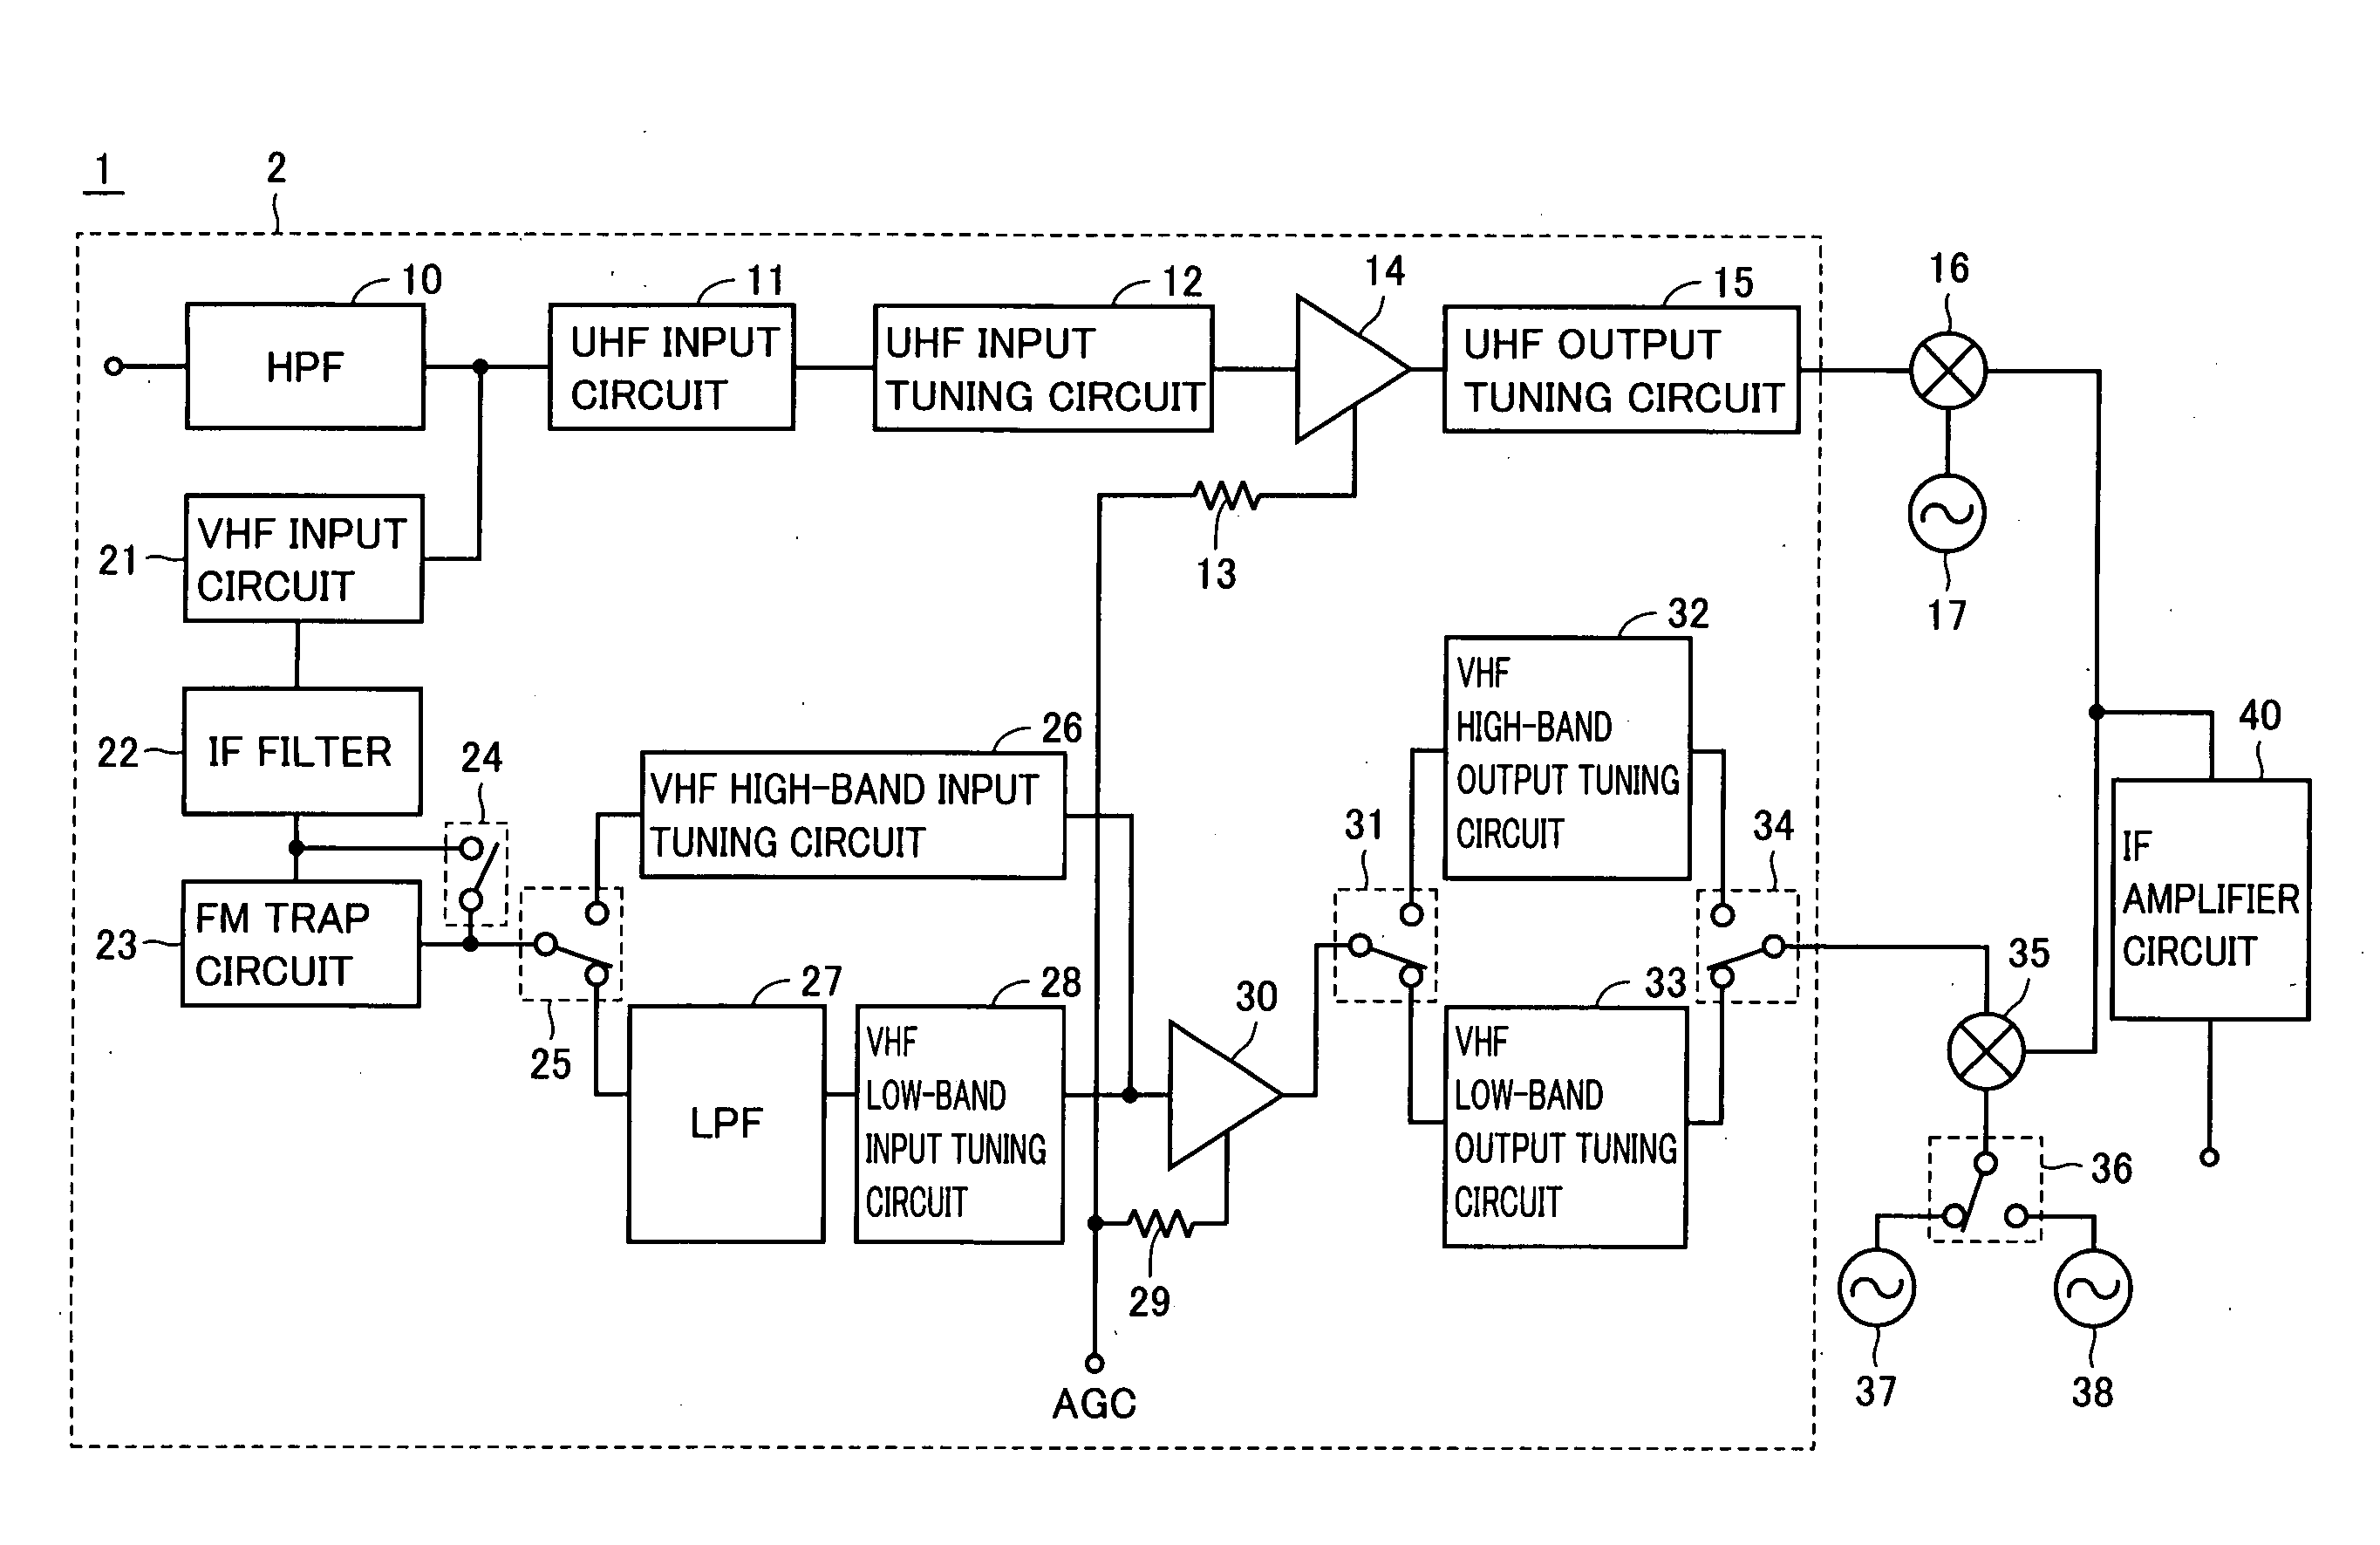 Receiver device having improved selectivity characteristics